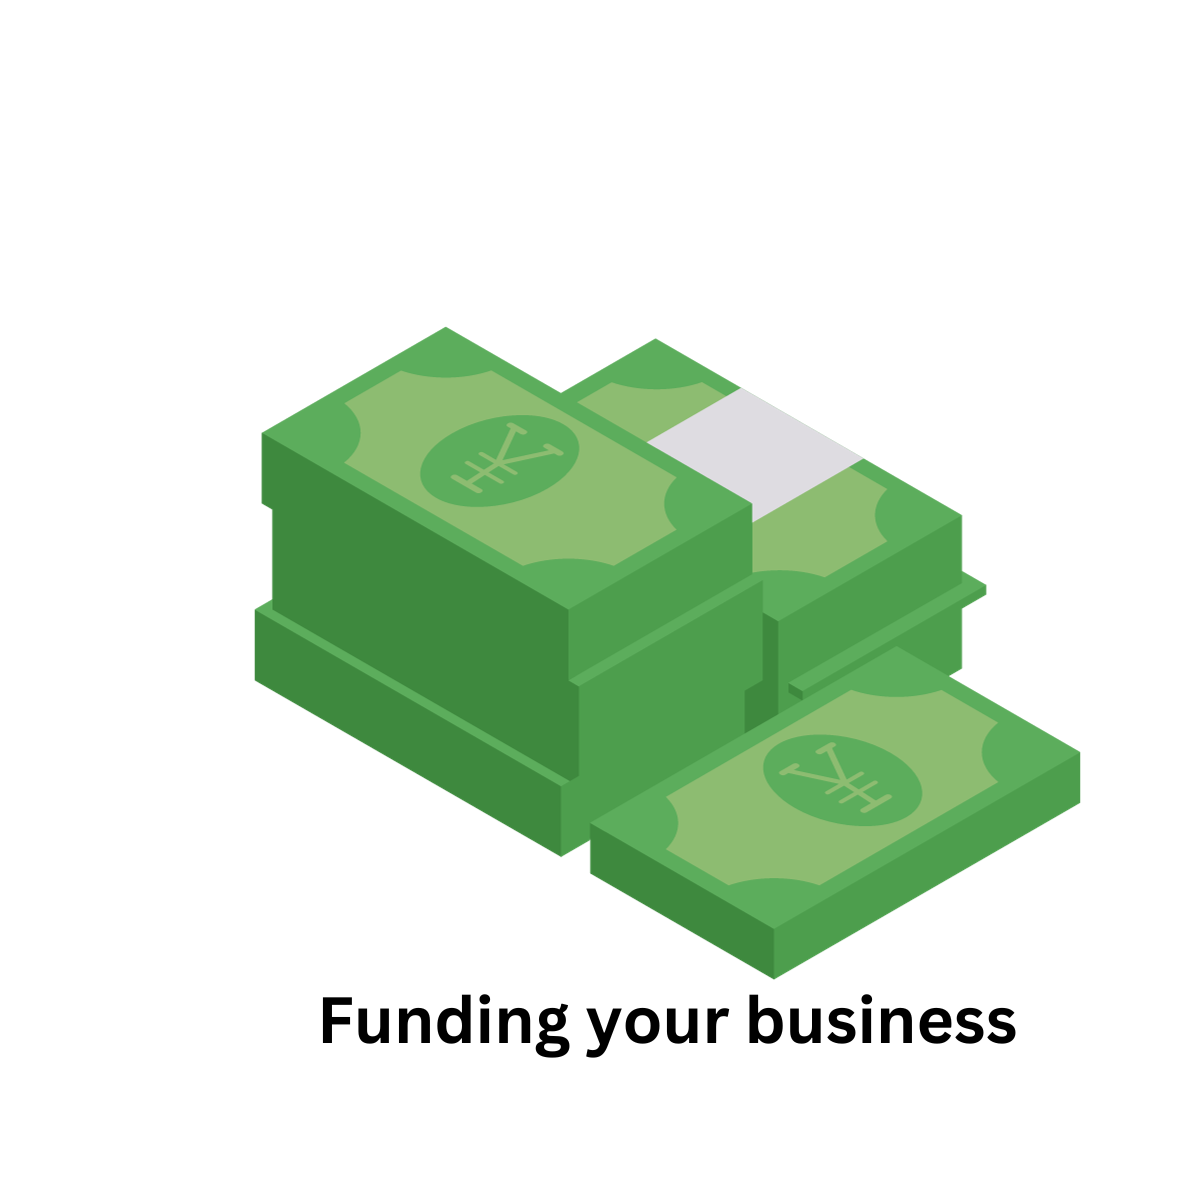 Why is my business not getting funding 2?